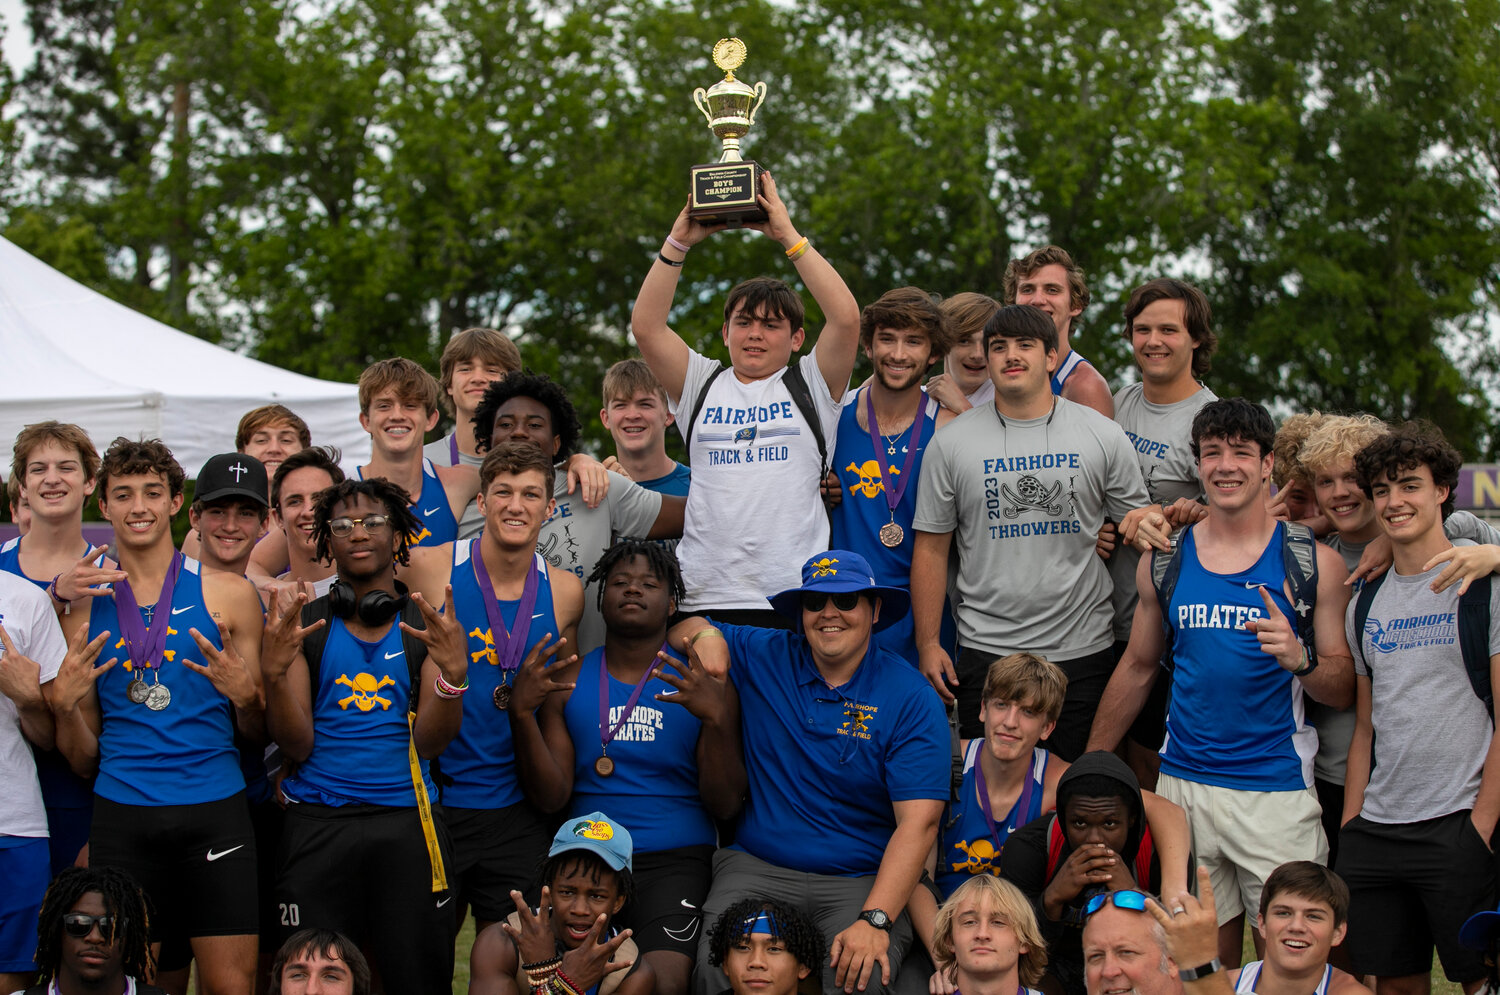 The Fairhope Pirate boys’ track team took over the podium after they received their trophy for winning the team competition at the Baldwin County Public Schools track and field championship meet Tuesday, April 18, in Daphne. Junior Ben Klapp earned four podium finishes to help his team rack up 21 total top-three spots and was named the most outstanding male performer.